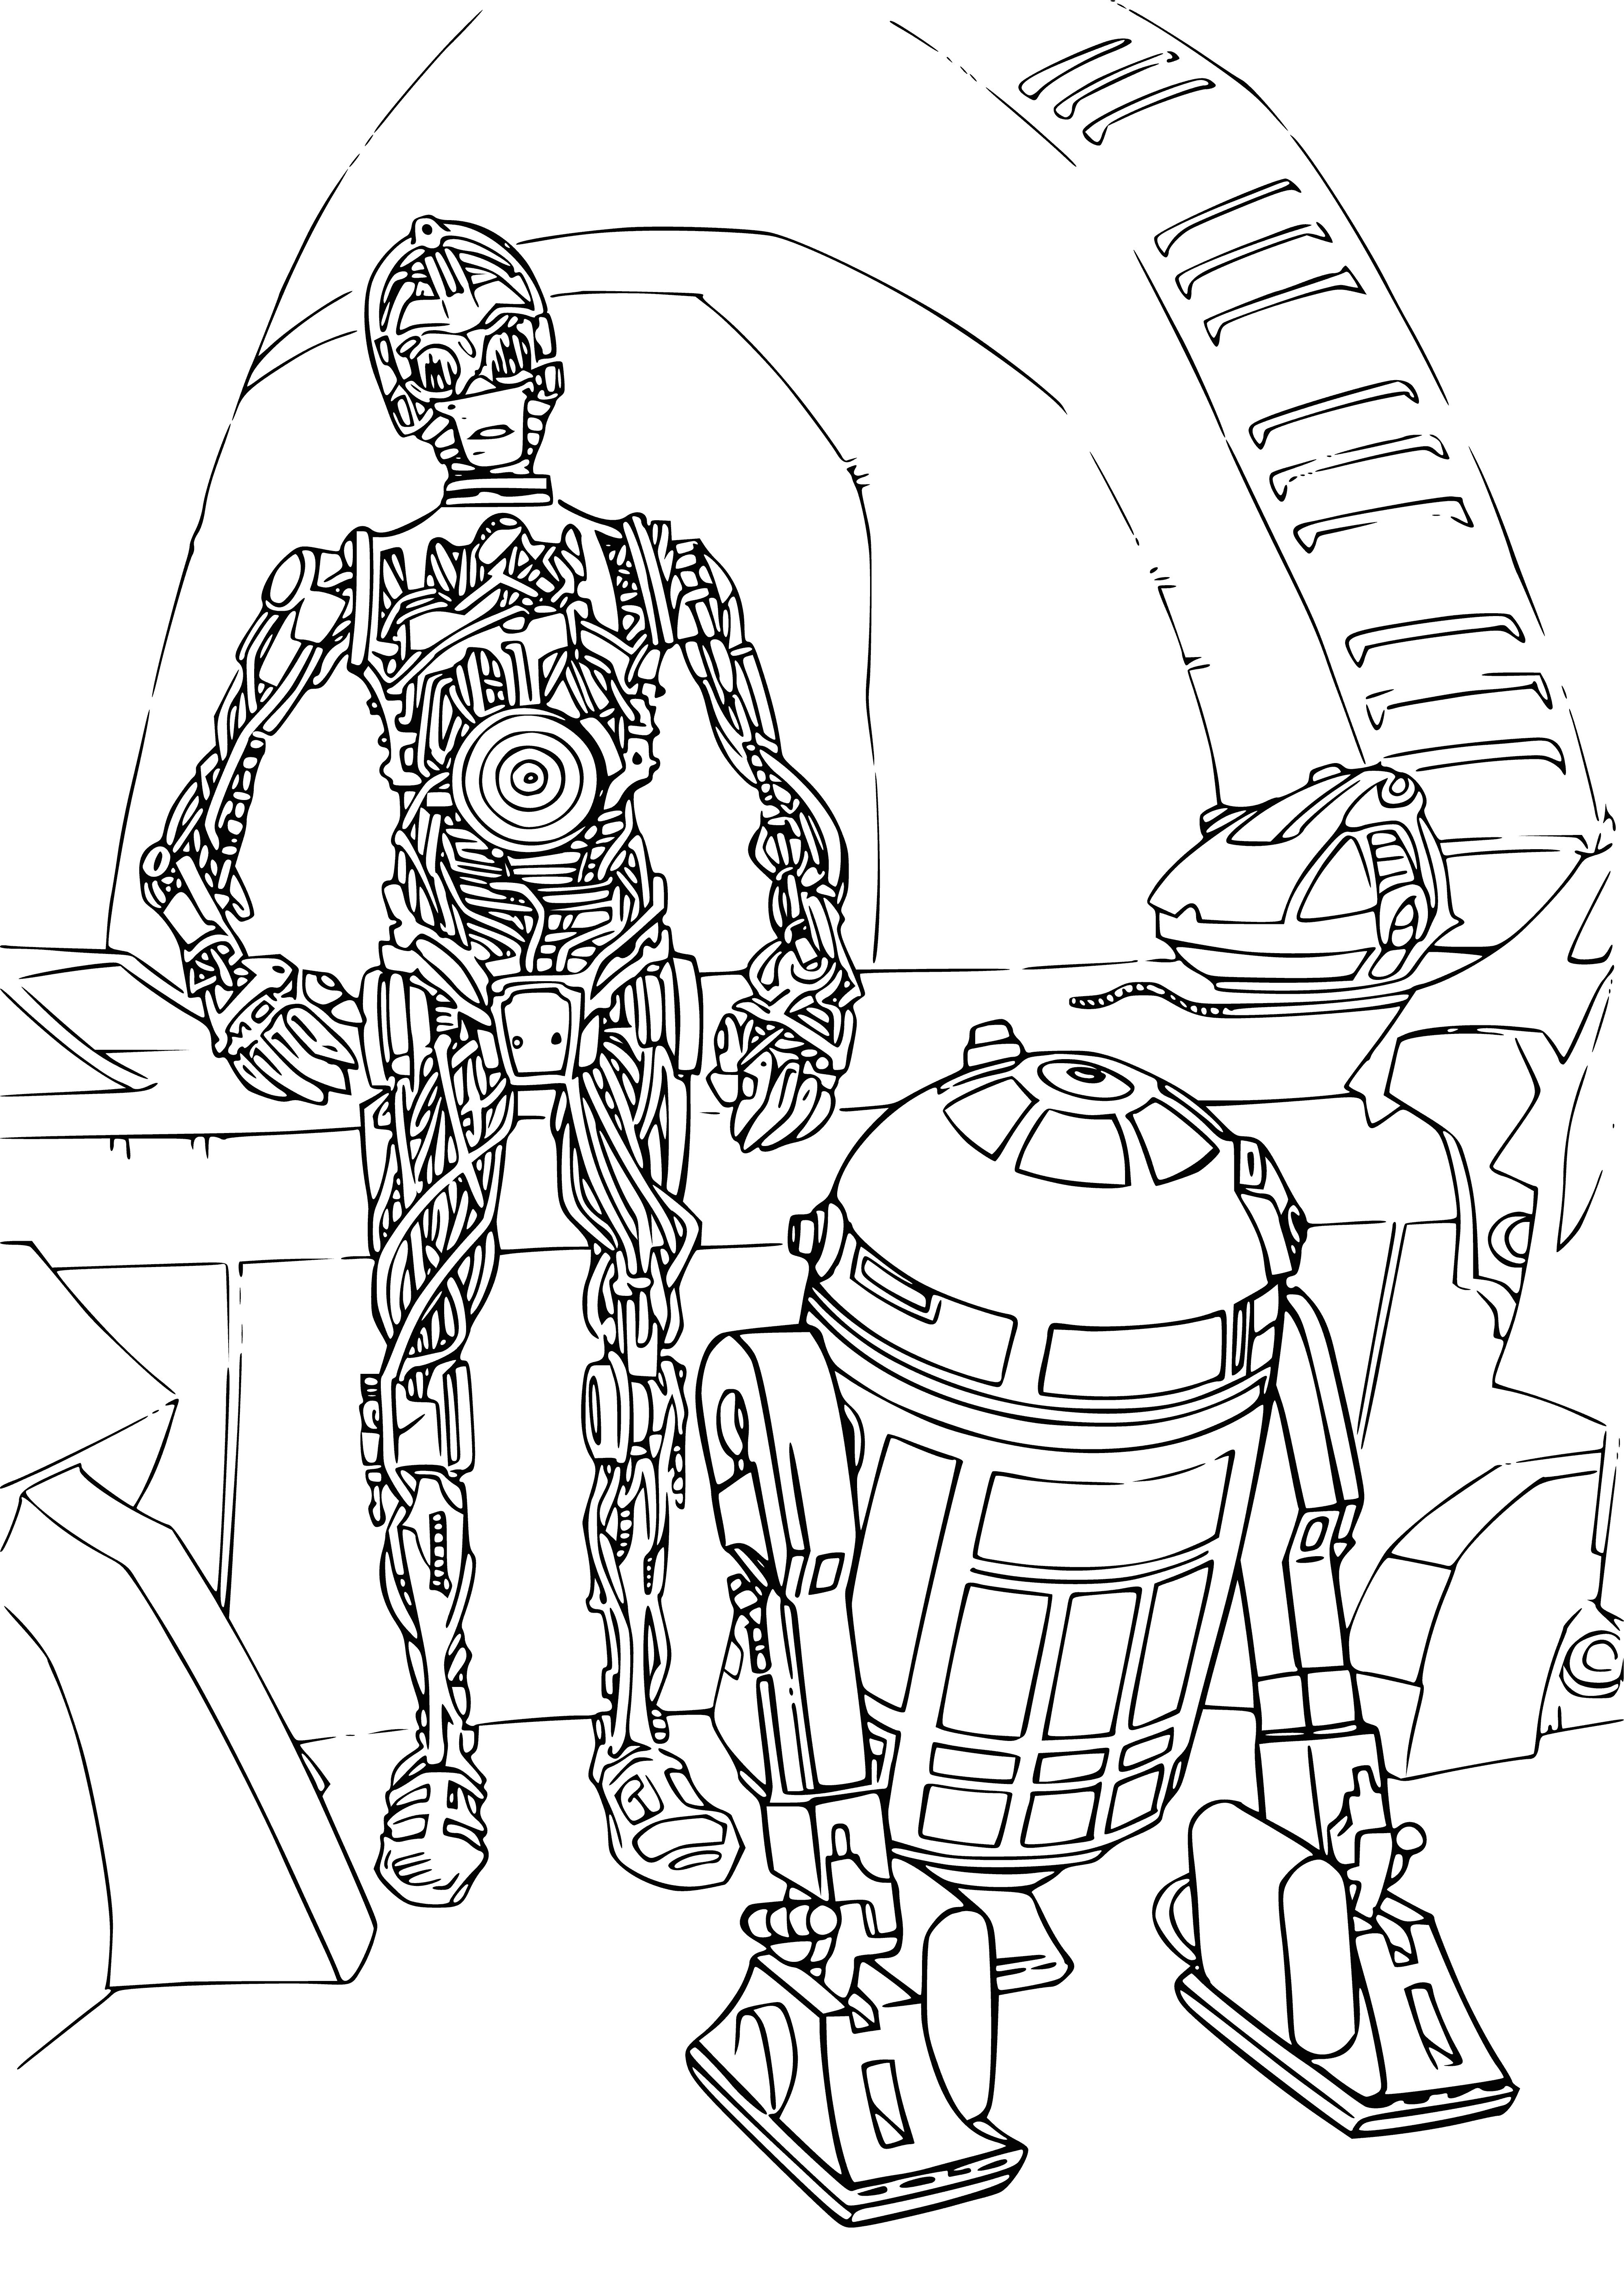 coloring page: Si-Tripio and R2-D2 embark on an adventure to save Naboo, accompany by Jedi Qui-Gon Jinn. #StarWars #EpisodeI #ThePhantomMenace